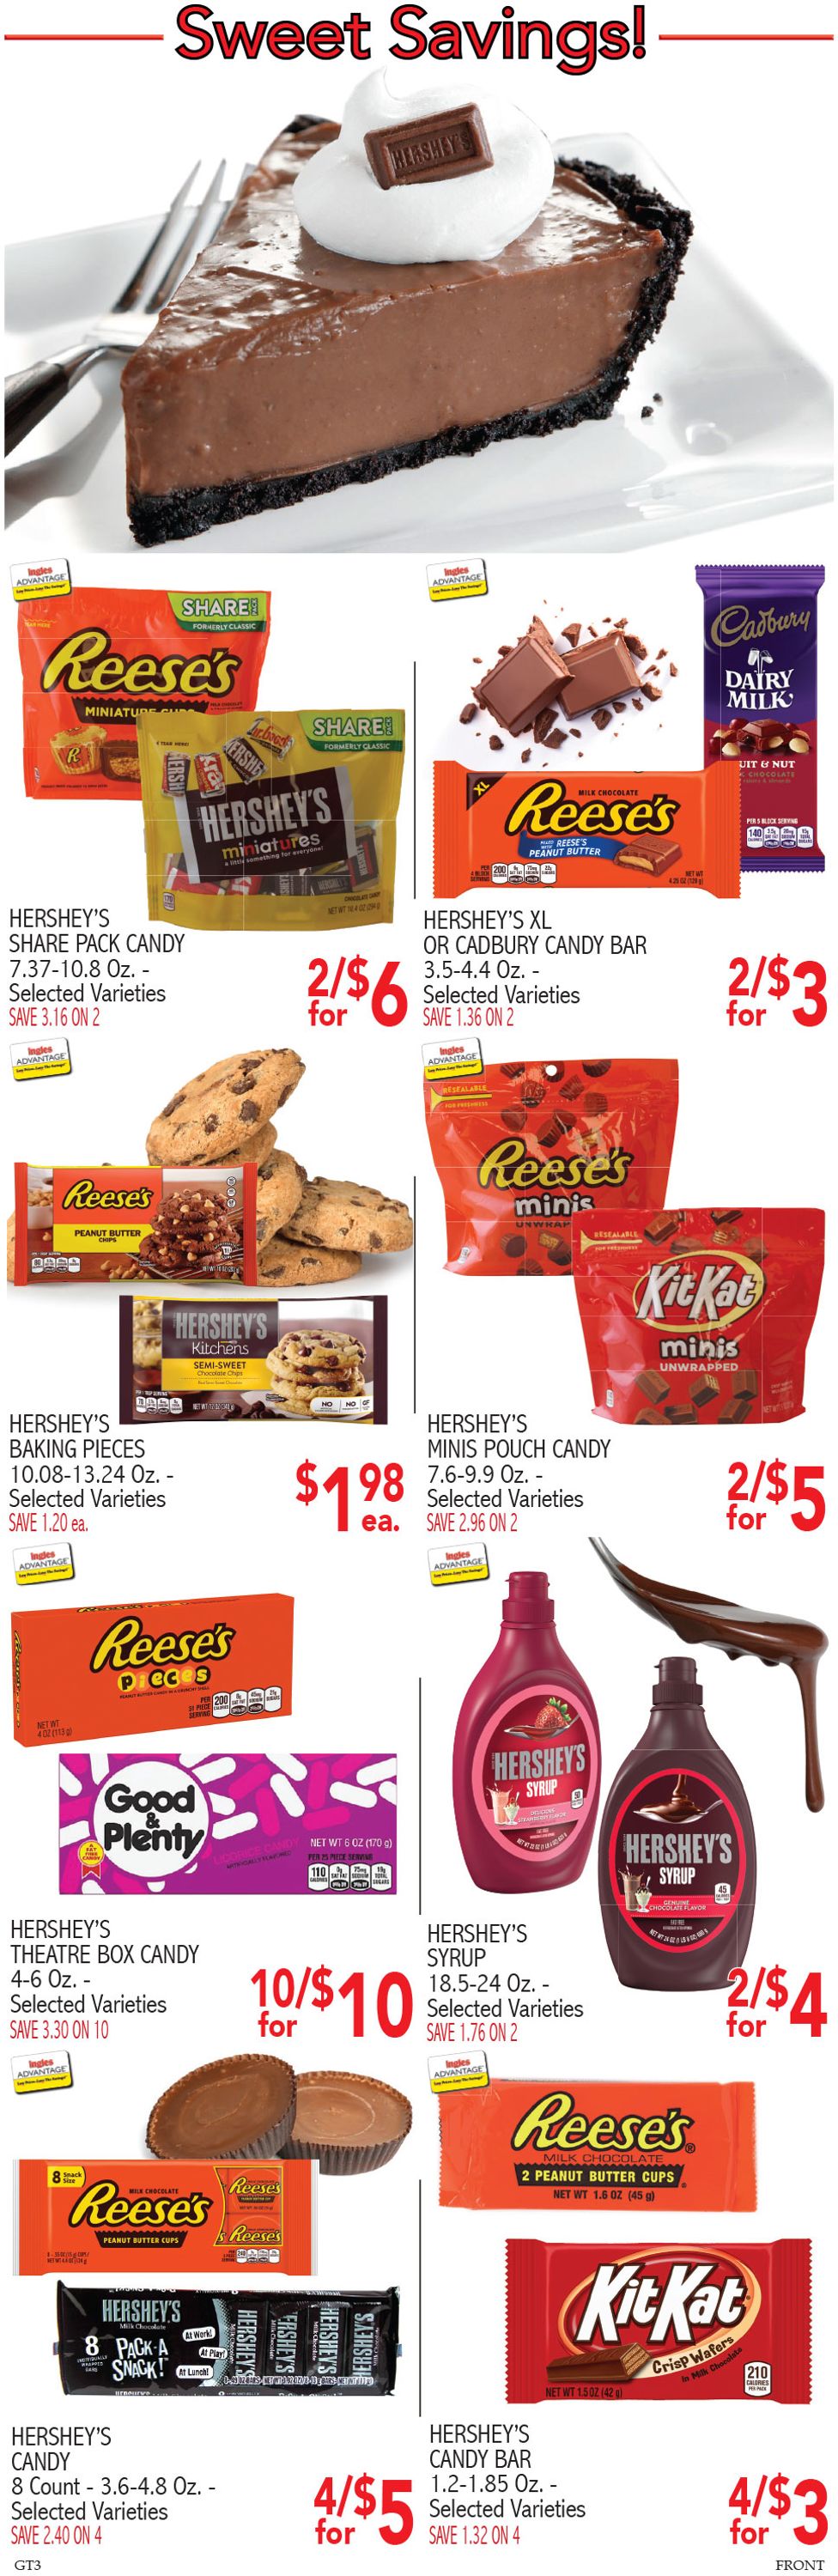 Ingles Ad from 03/24/2021